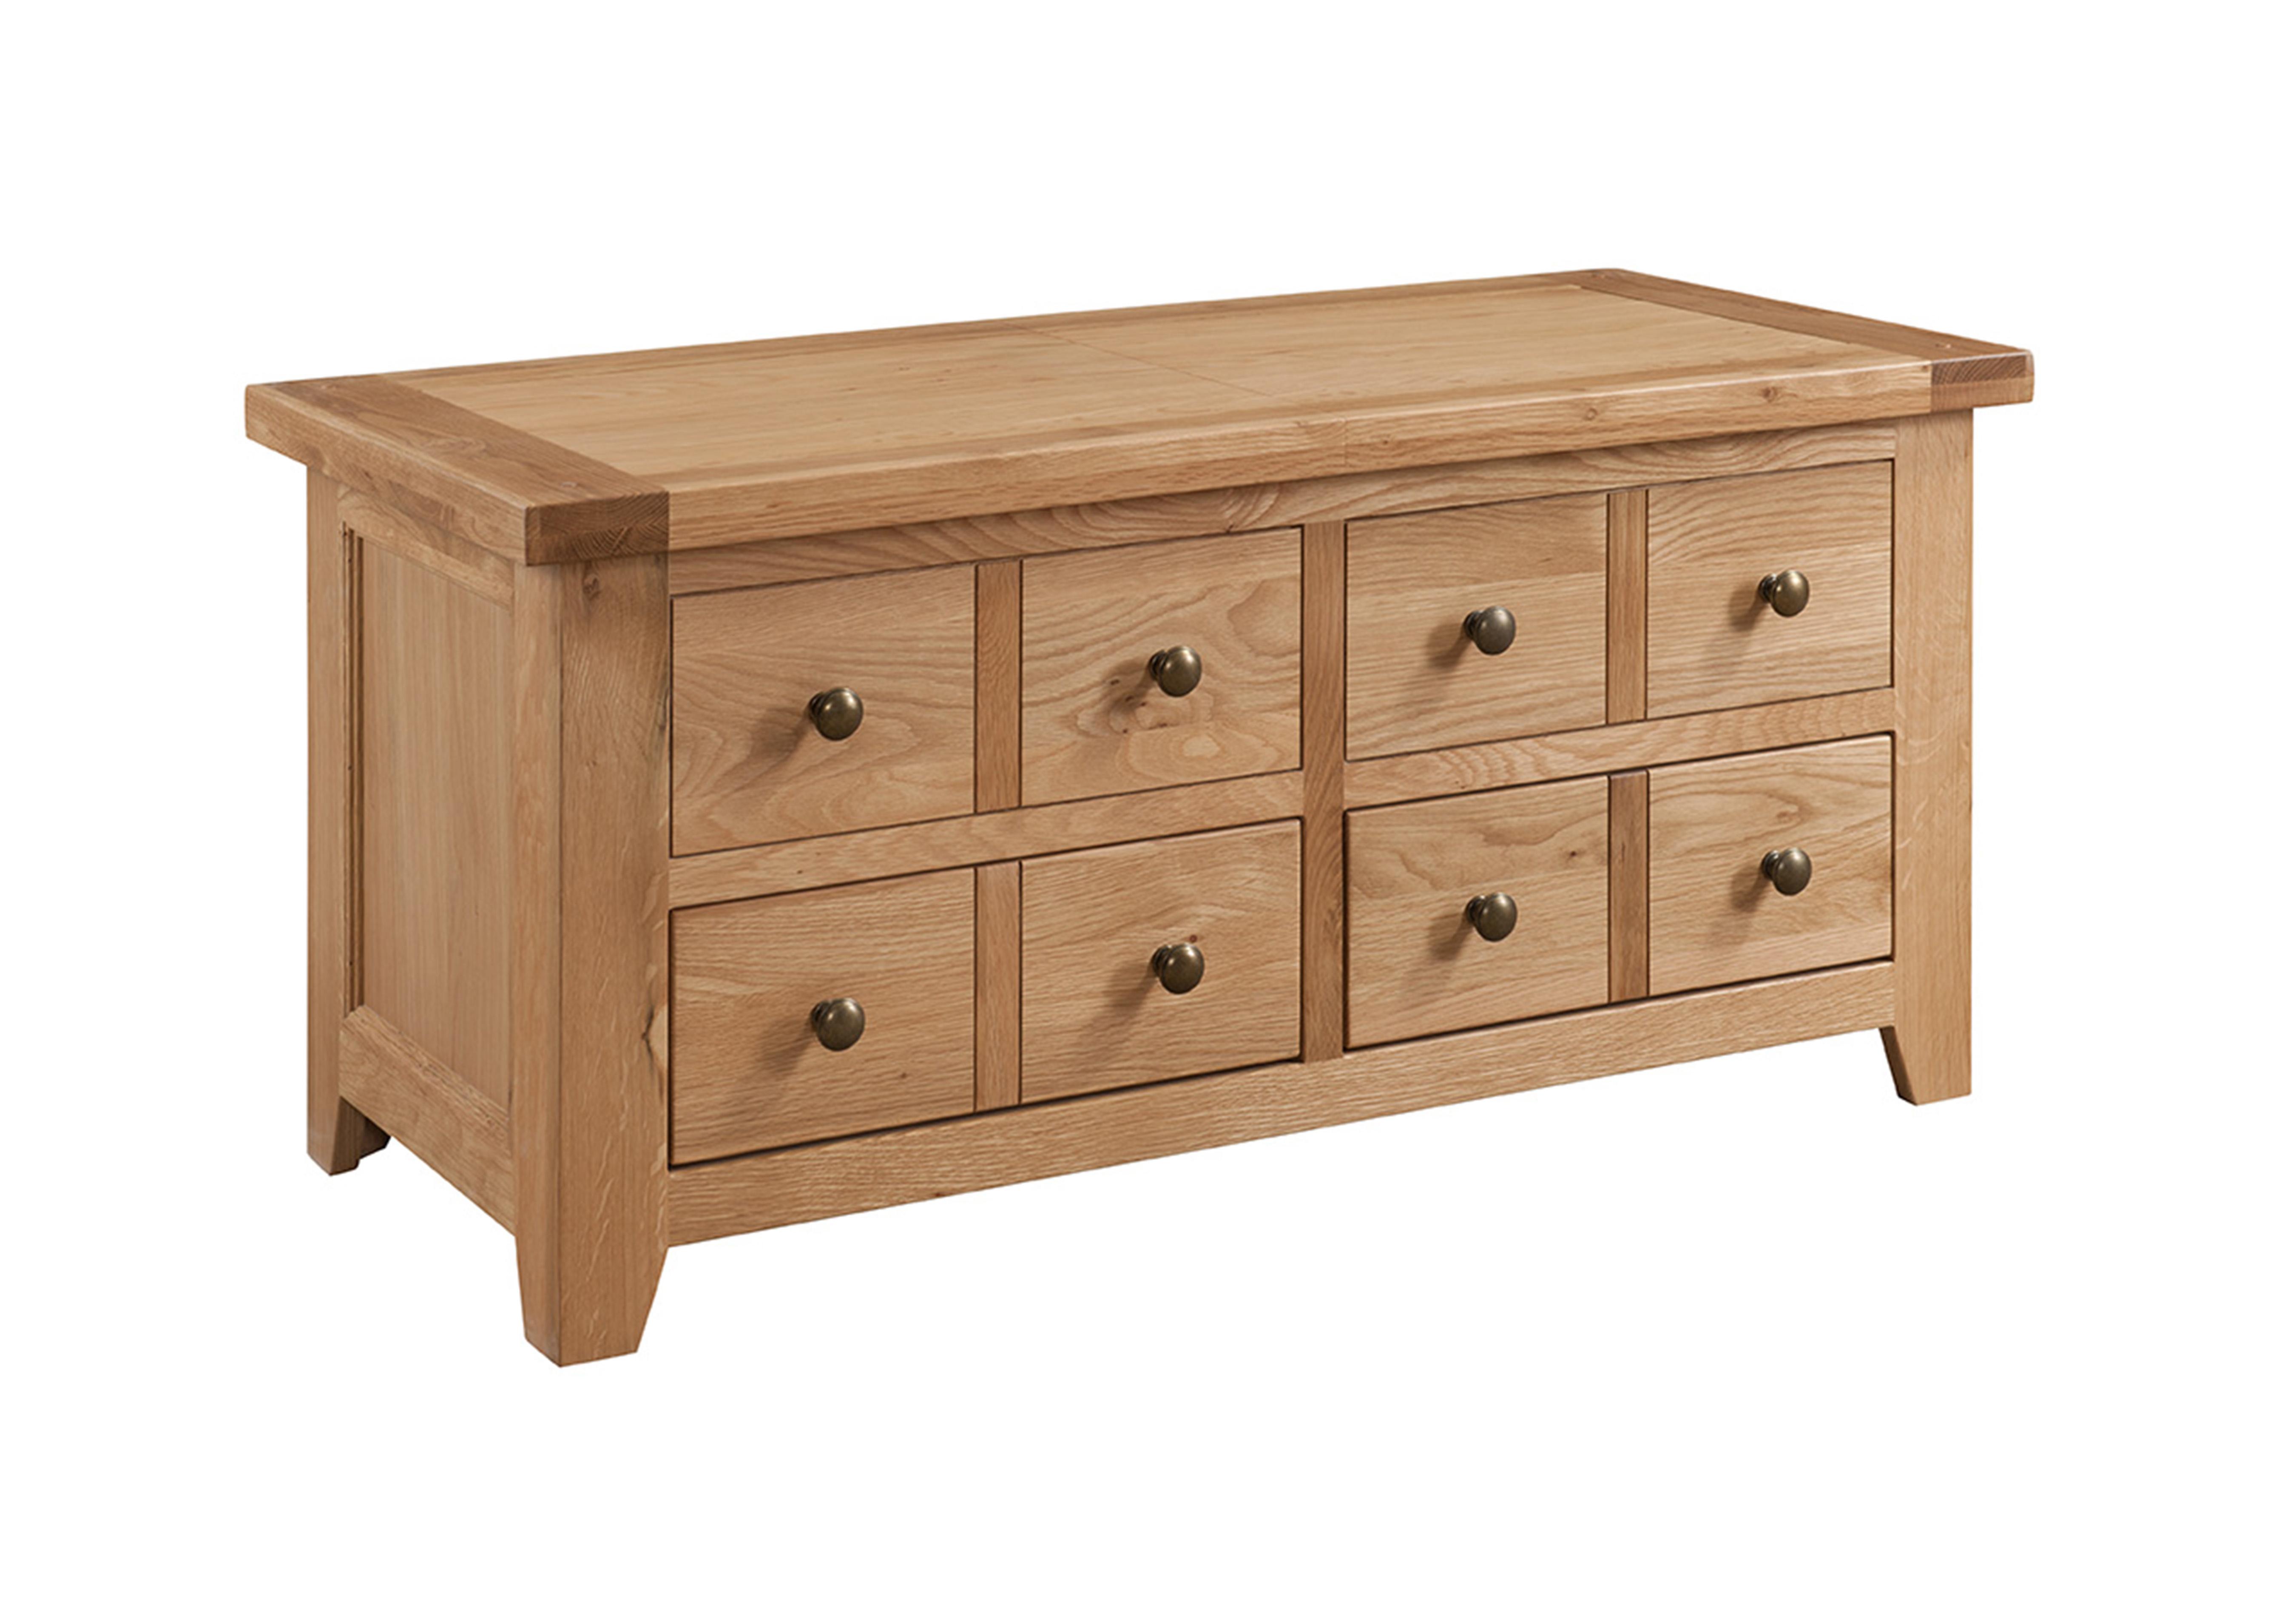 California Solid Oak Storage Coffee Table with Drawers in  on Furniture Village